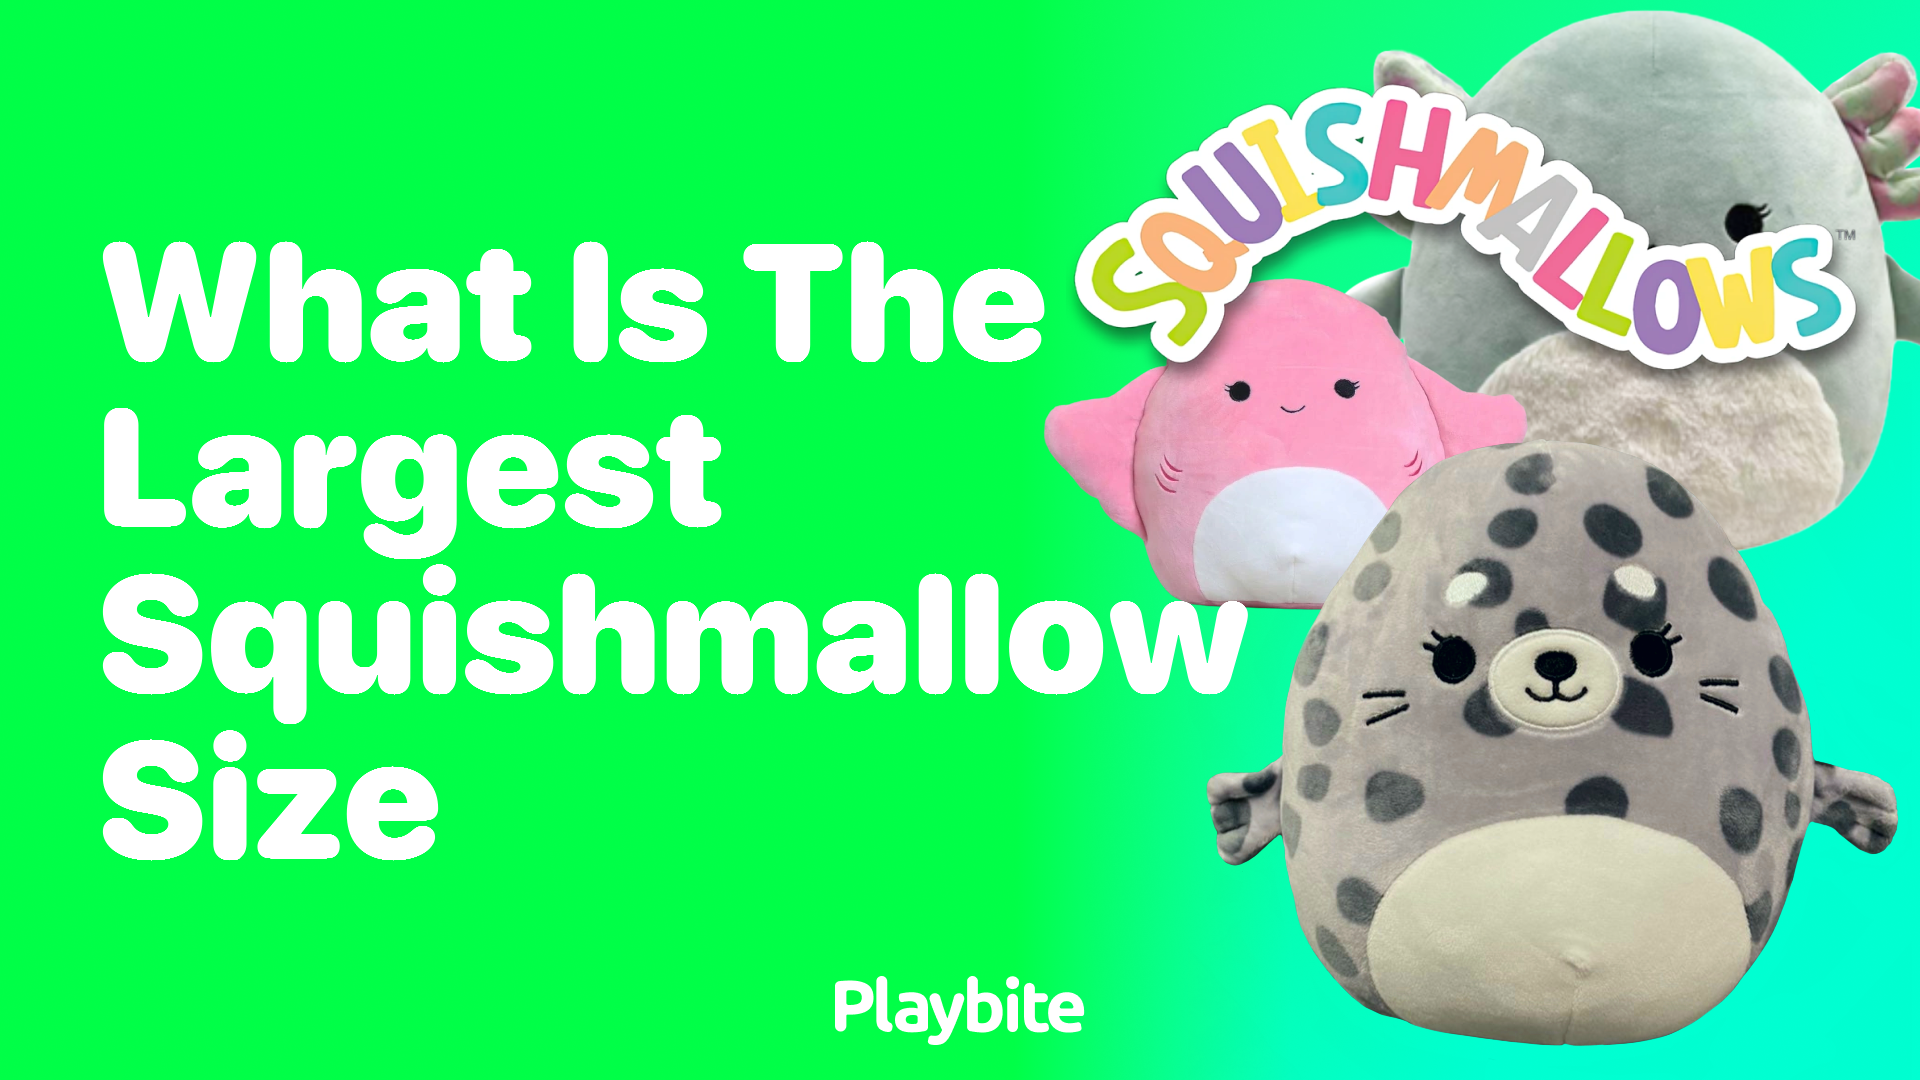 Biggest Squishmallows ever. Human sized.